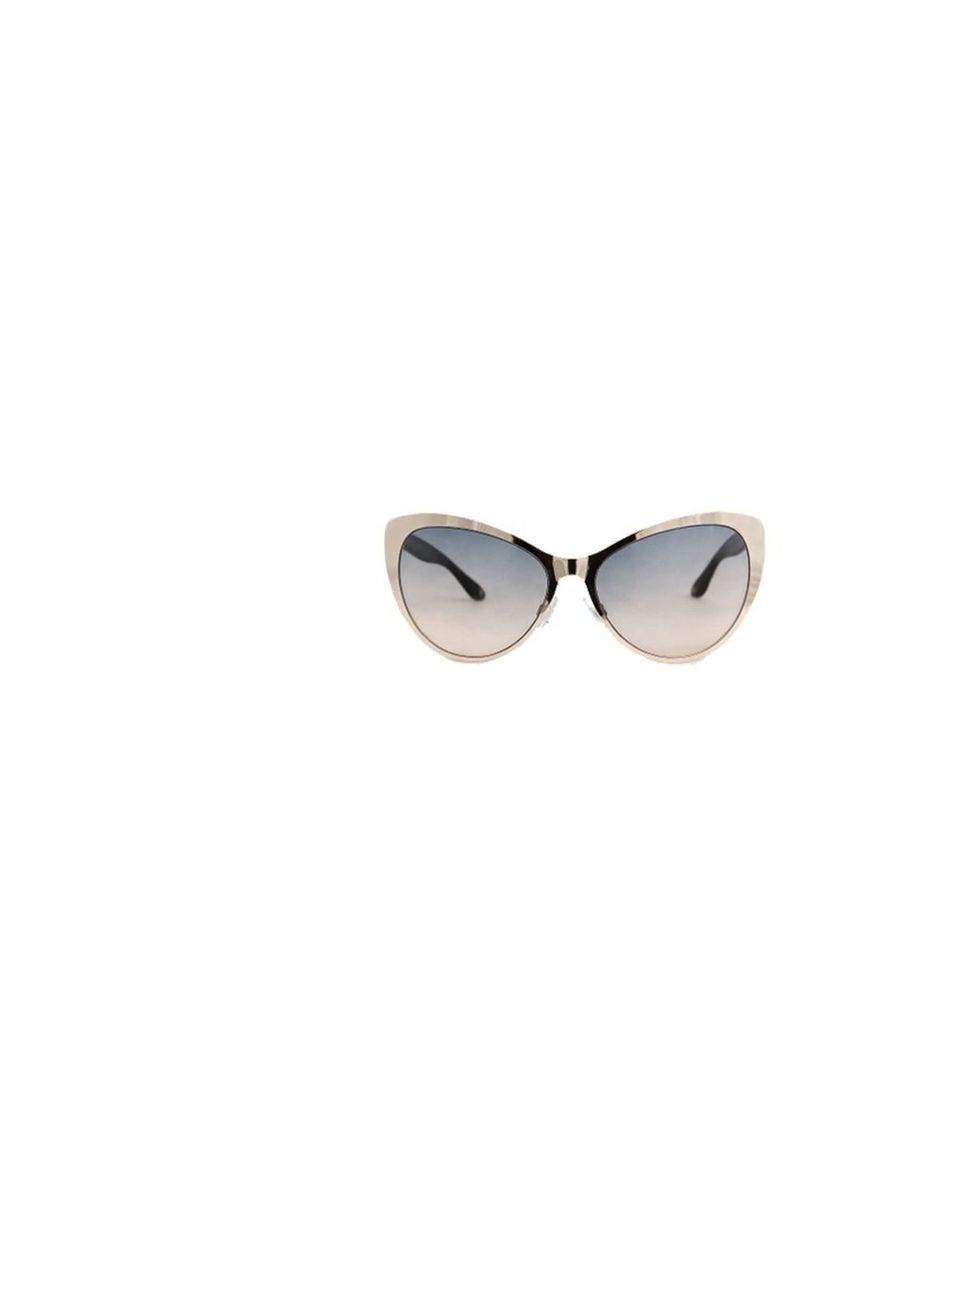 <p>The sun is shining and you know what that means... it's sunglasses time! <a href="http://shop.mango.com/ficha.faces?state=touch_006_IN">Mango</a> sunglasses, £24.99</p>